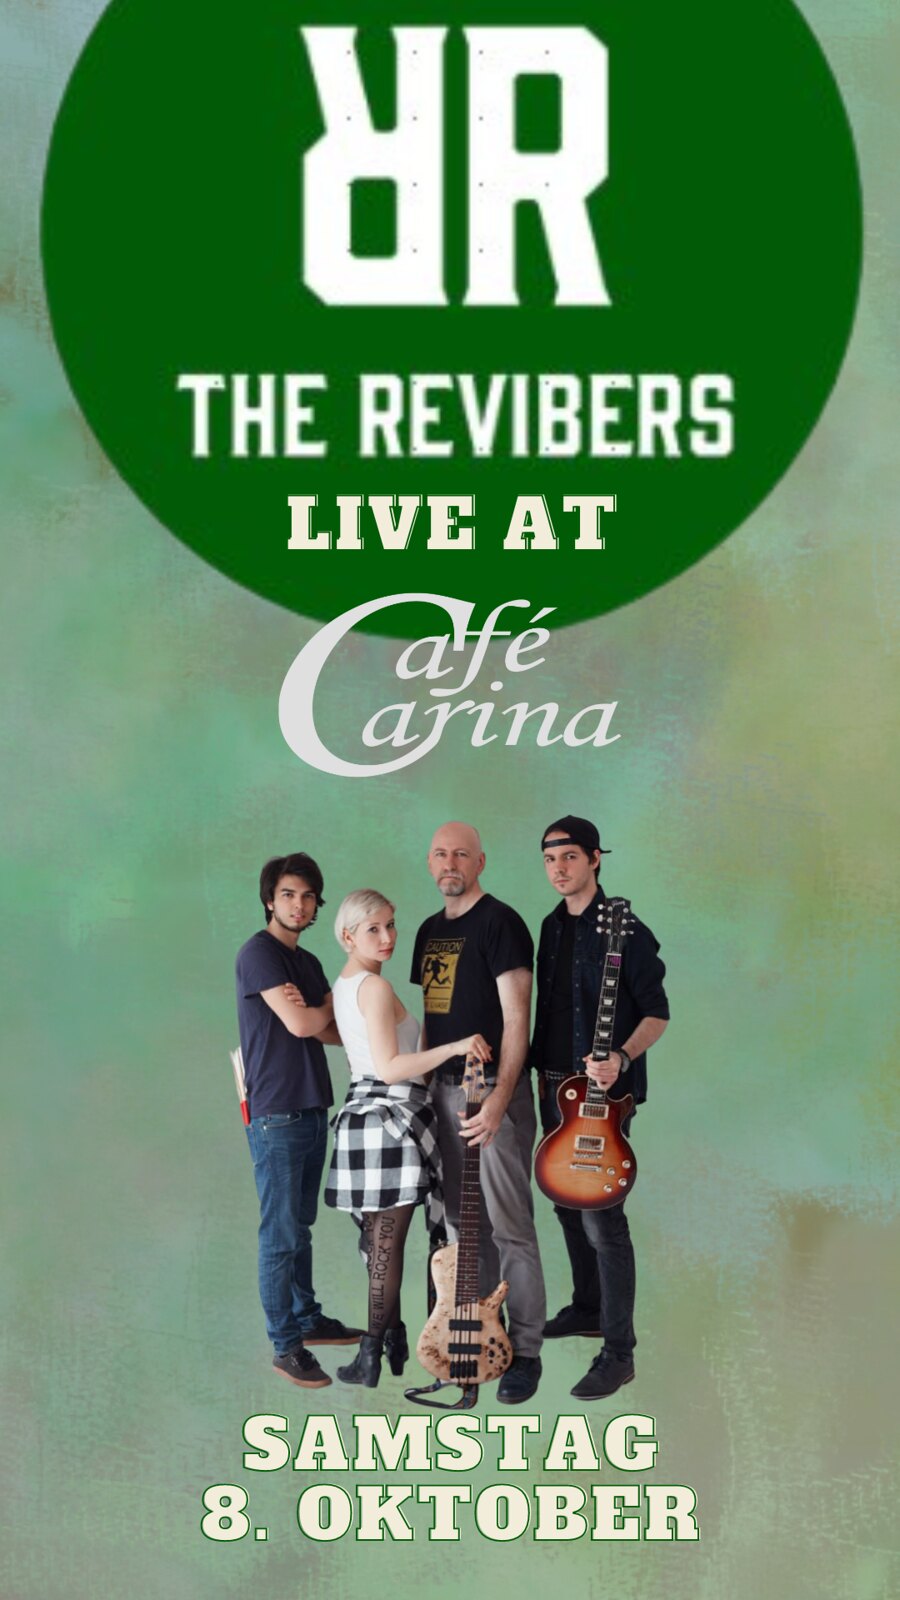 The Revibers